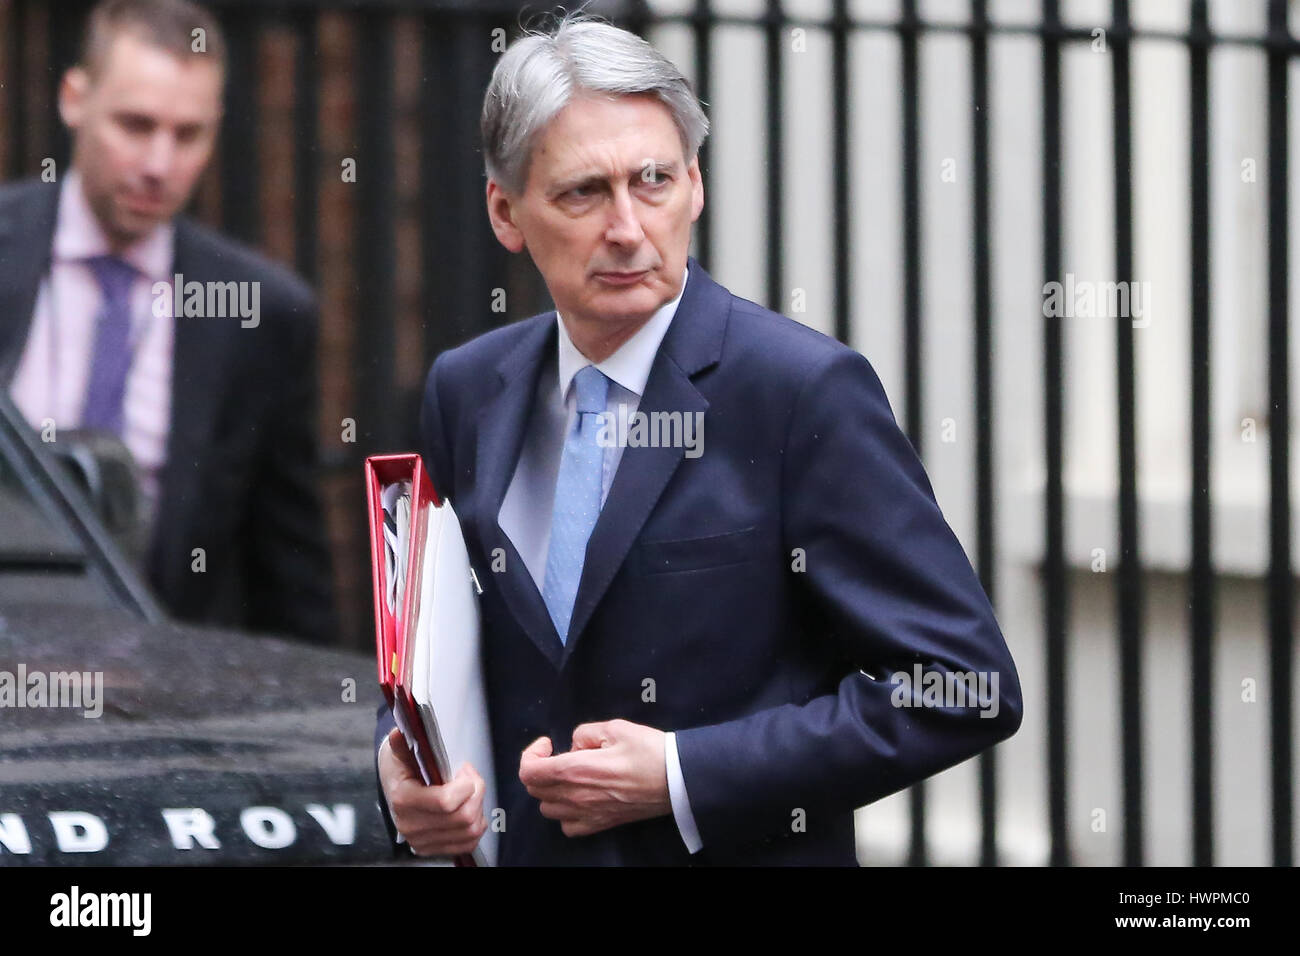 Downing Street. London, UK. 22nd Mar, 2017. Philip Hammond Chancellor of the Exchequer leaving Downing Street to attend Prime Ministers Questions (PMQS) at the House of Commons.Credit: Dinendra Haria/Alamy Live News Stock Photo